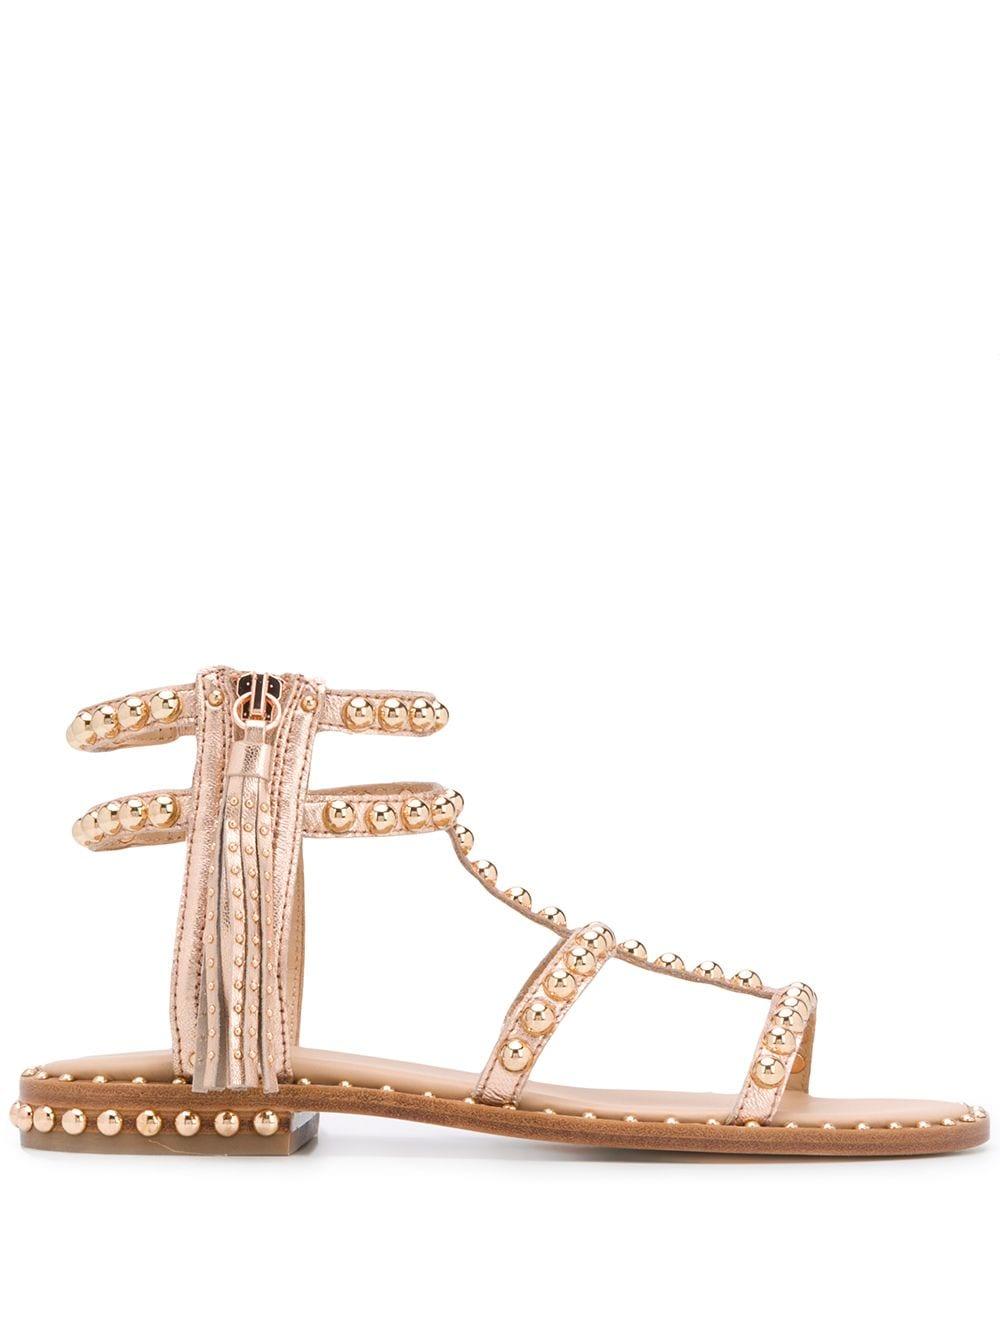 Ash Studded Gladiator Sandals in Gold (Metallic) - Lyst